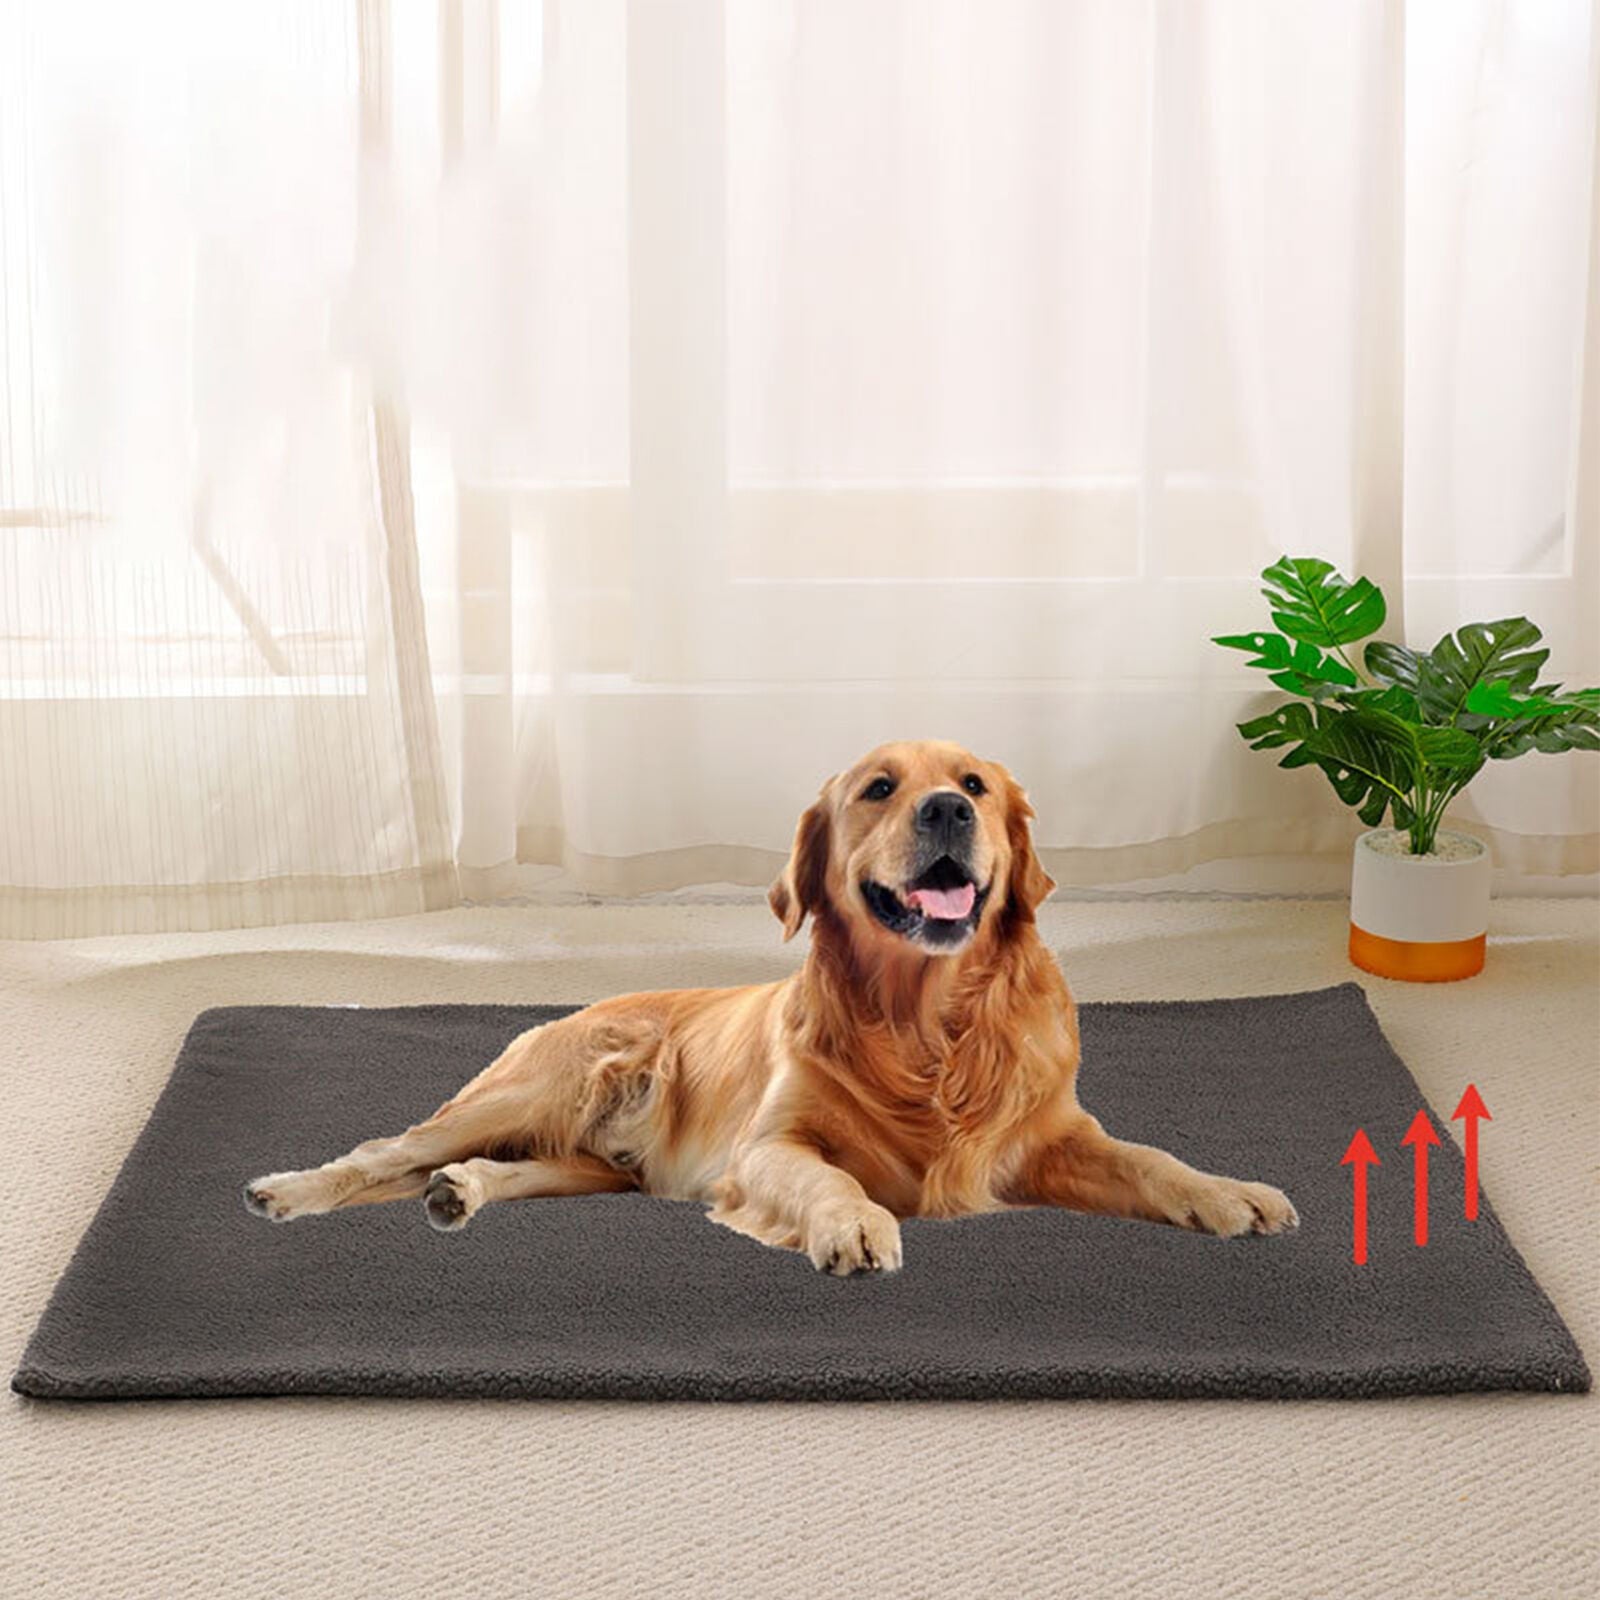 Adjustable Heating Pad for Cats and Dogs - Keep Your Pets Warm and Cozy